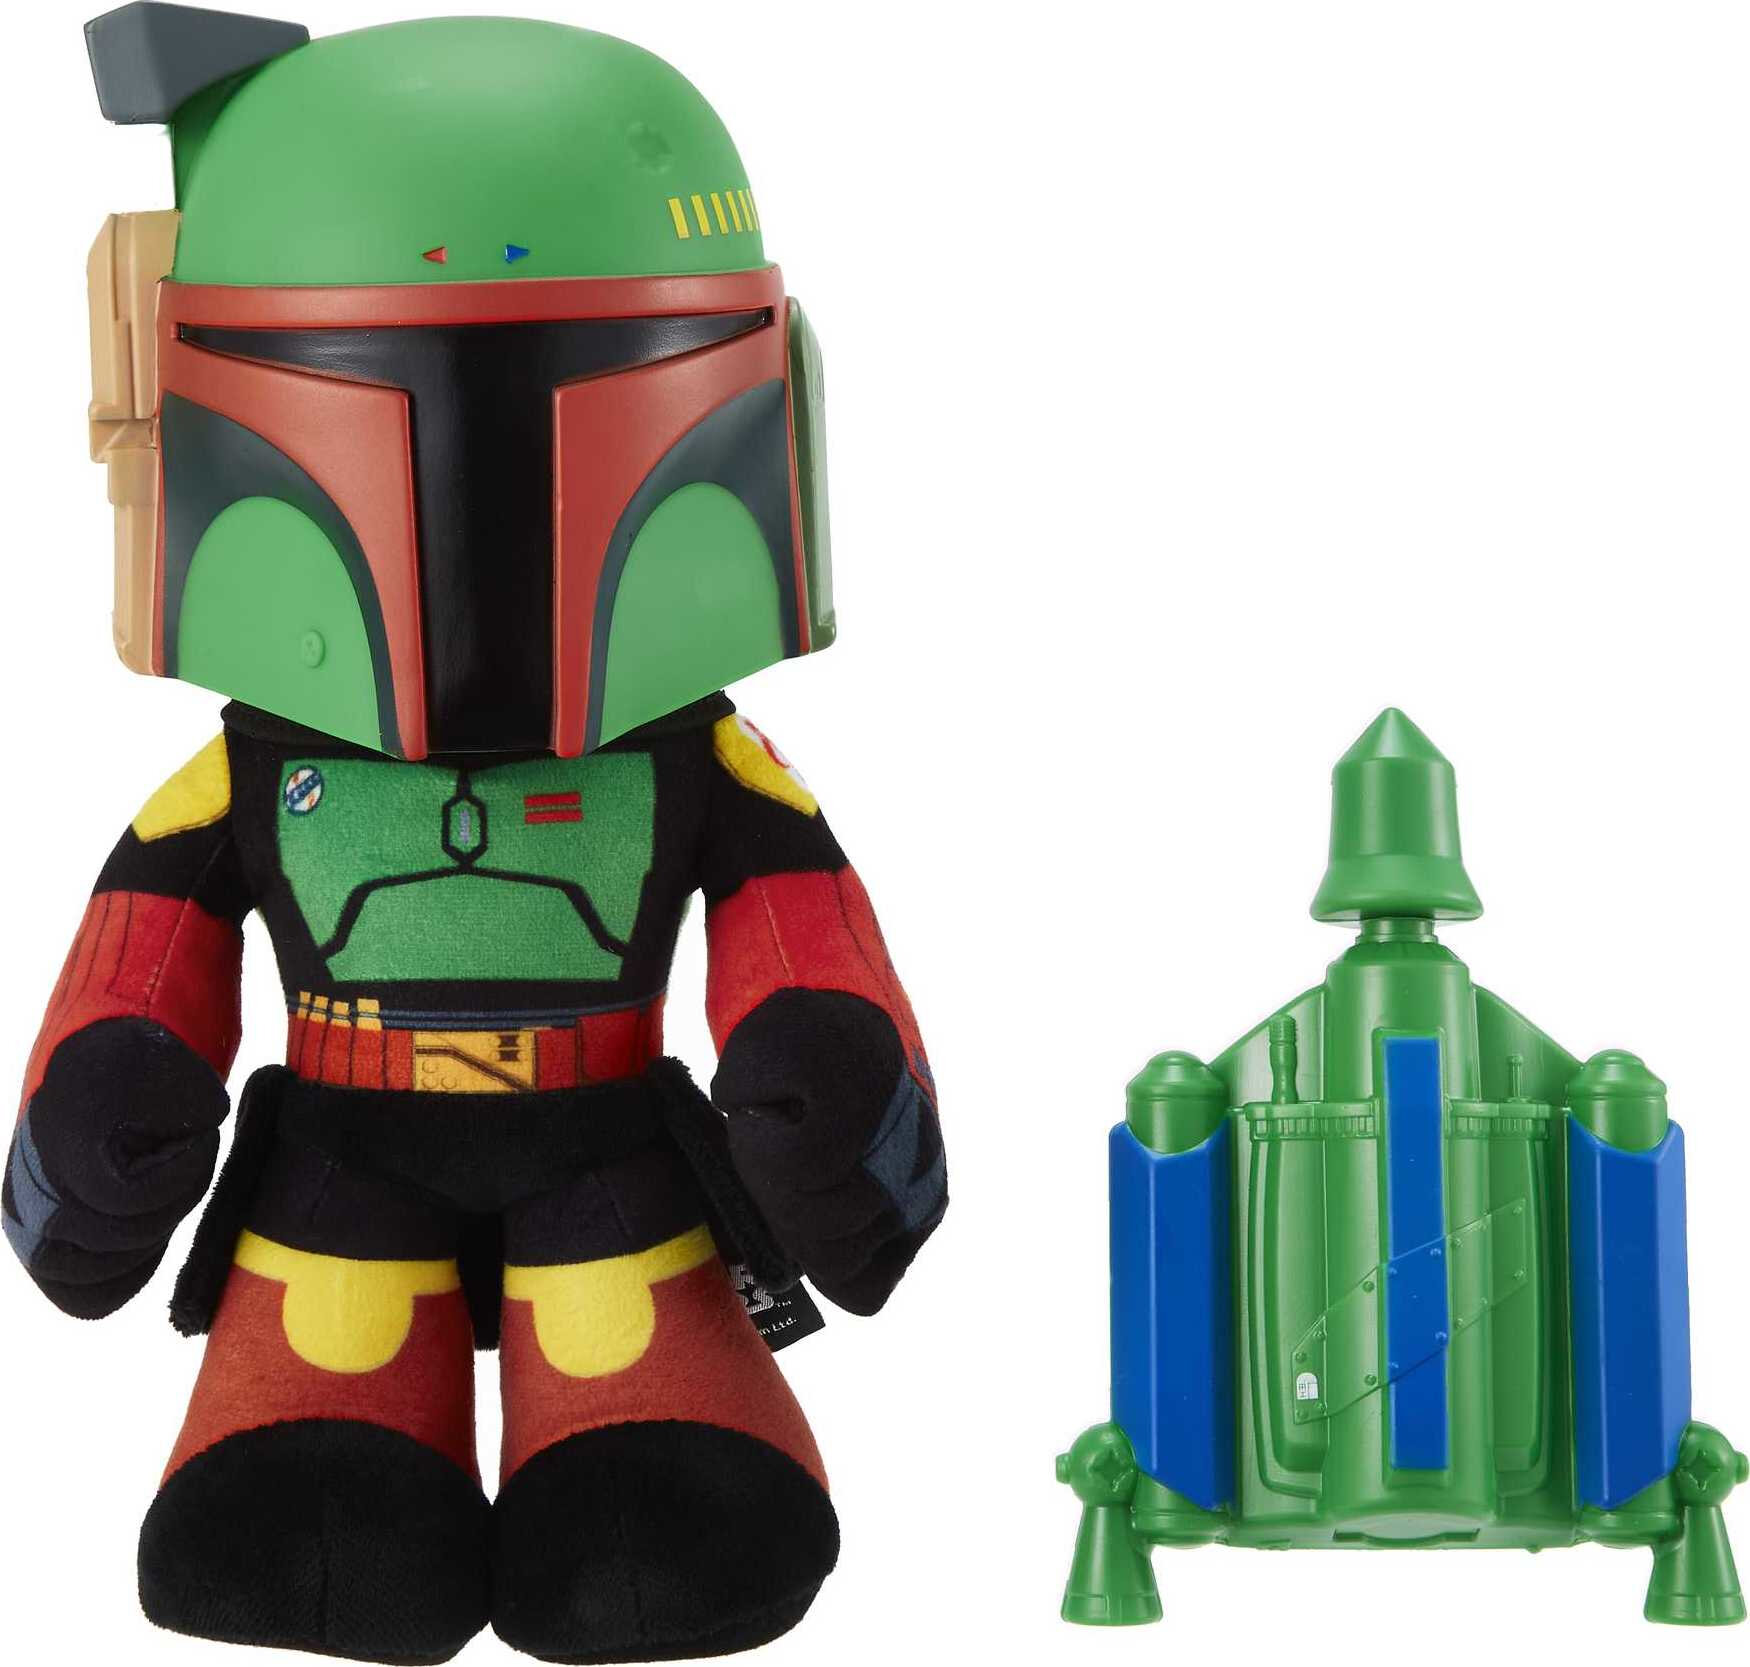 Star Wars Boba Fett Voice Cloner 12" Feature Plush with Air-Powered Soft Rocket Launcher - image 1 of 6